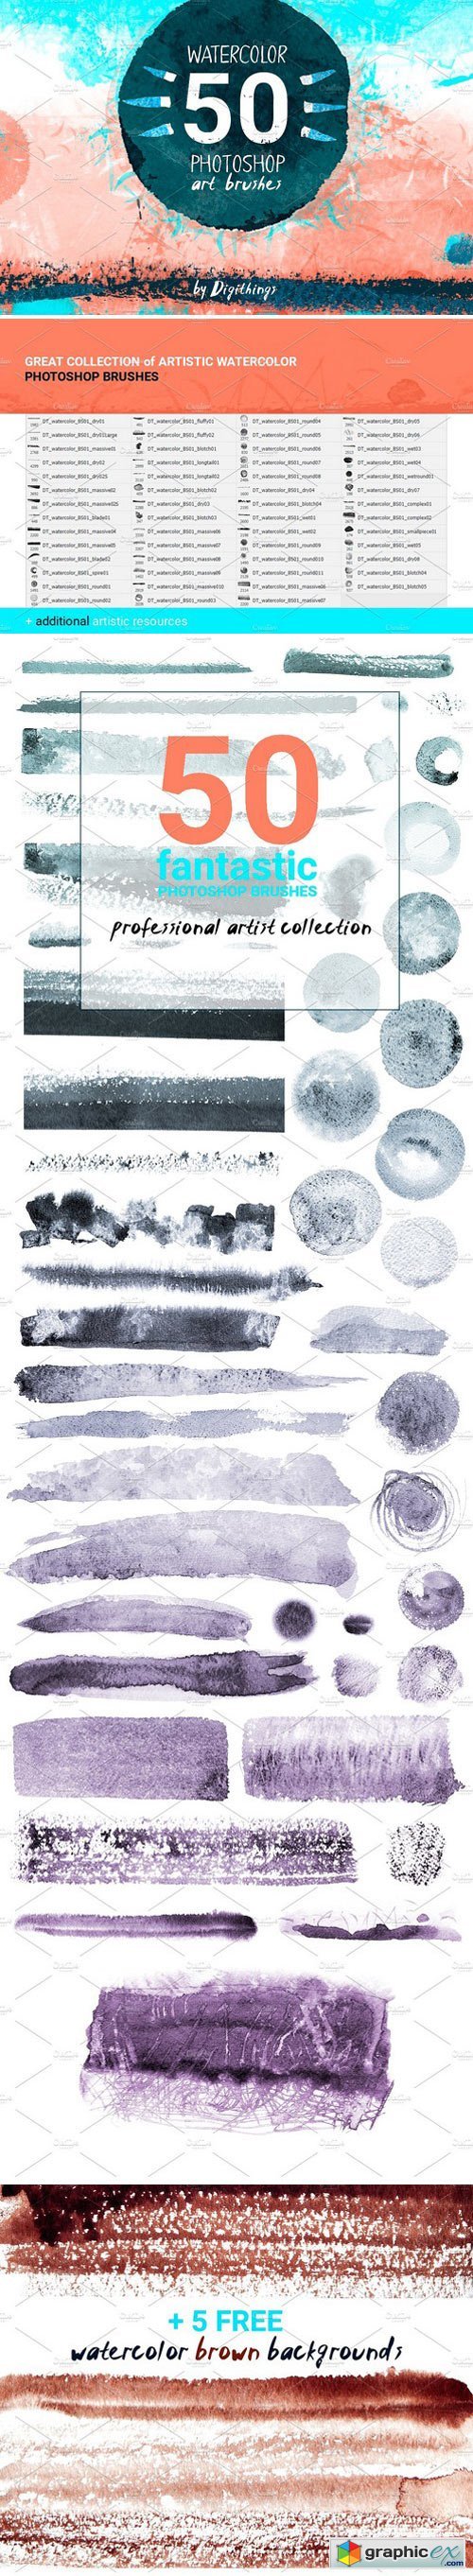 Watercolor art brushes for Photoshop